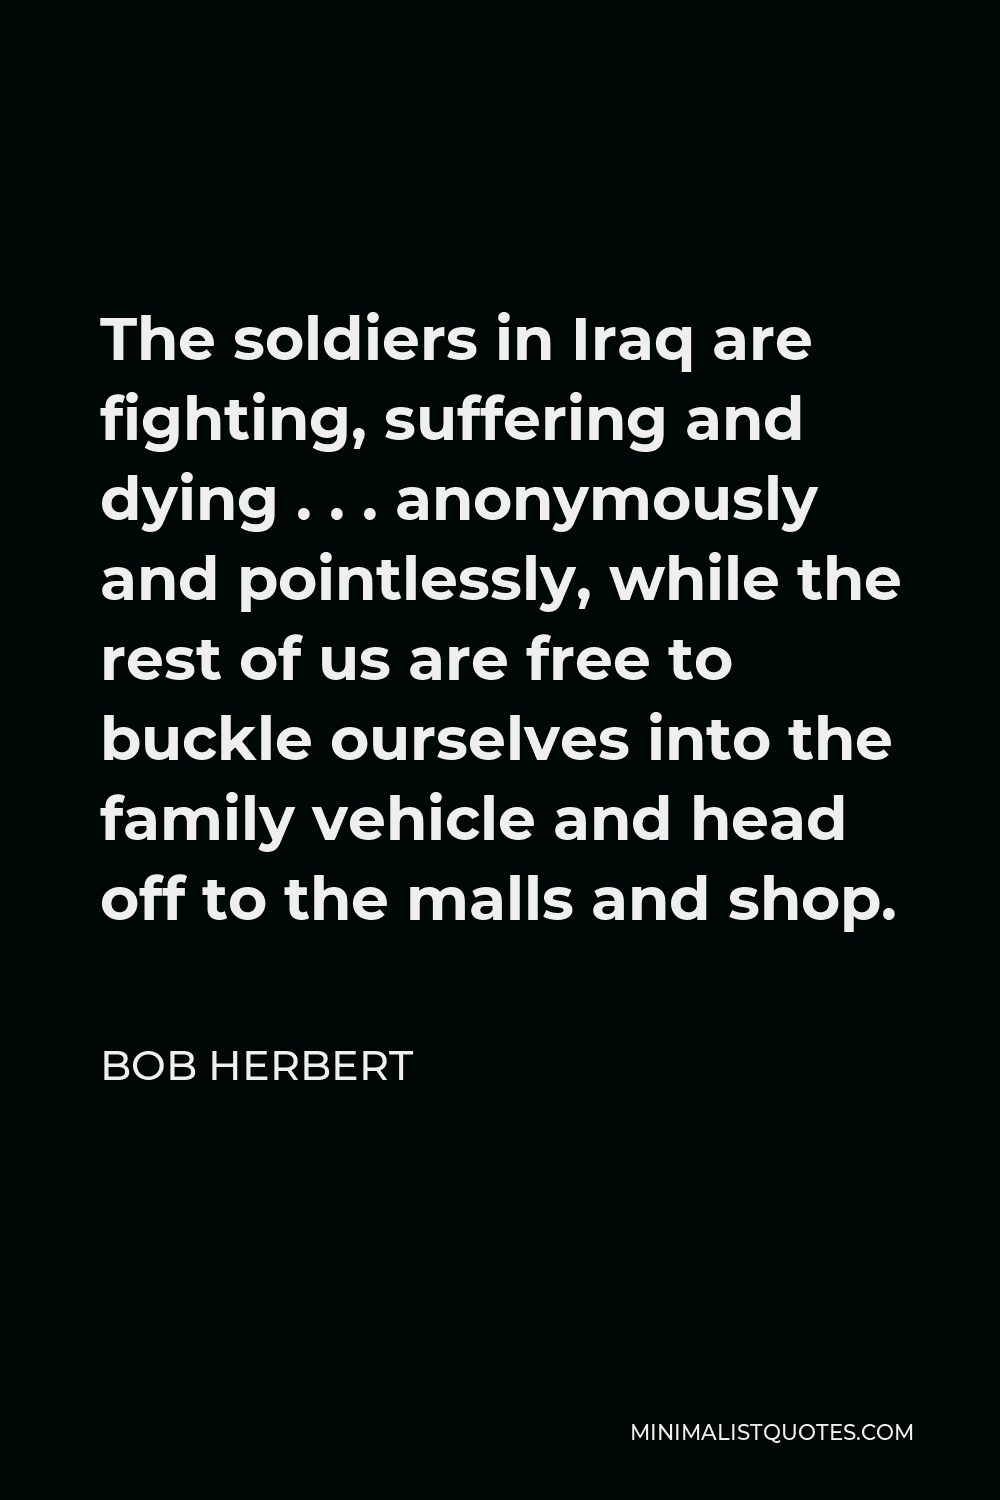 Bob Herbert Quote - The soldiers in Iraq are fighting, suffering and dying . . . anonymously and pointlessly, while the rest of us are free to buckle ourselves into the family vehicle and head off to the malls and shop.